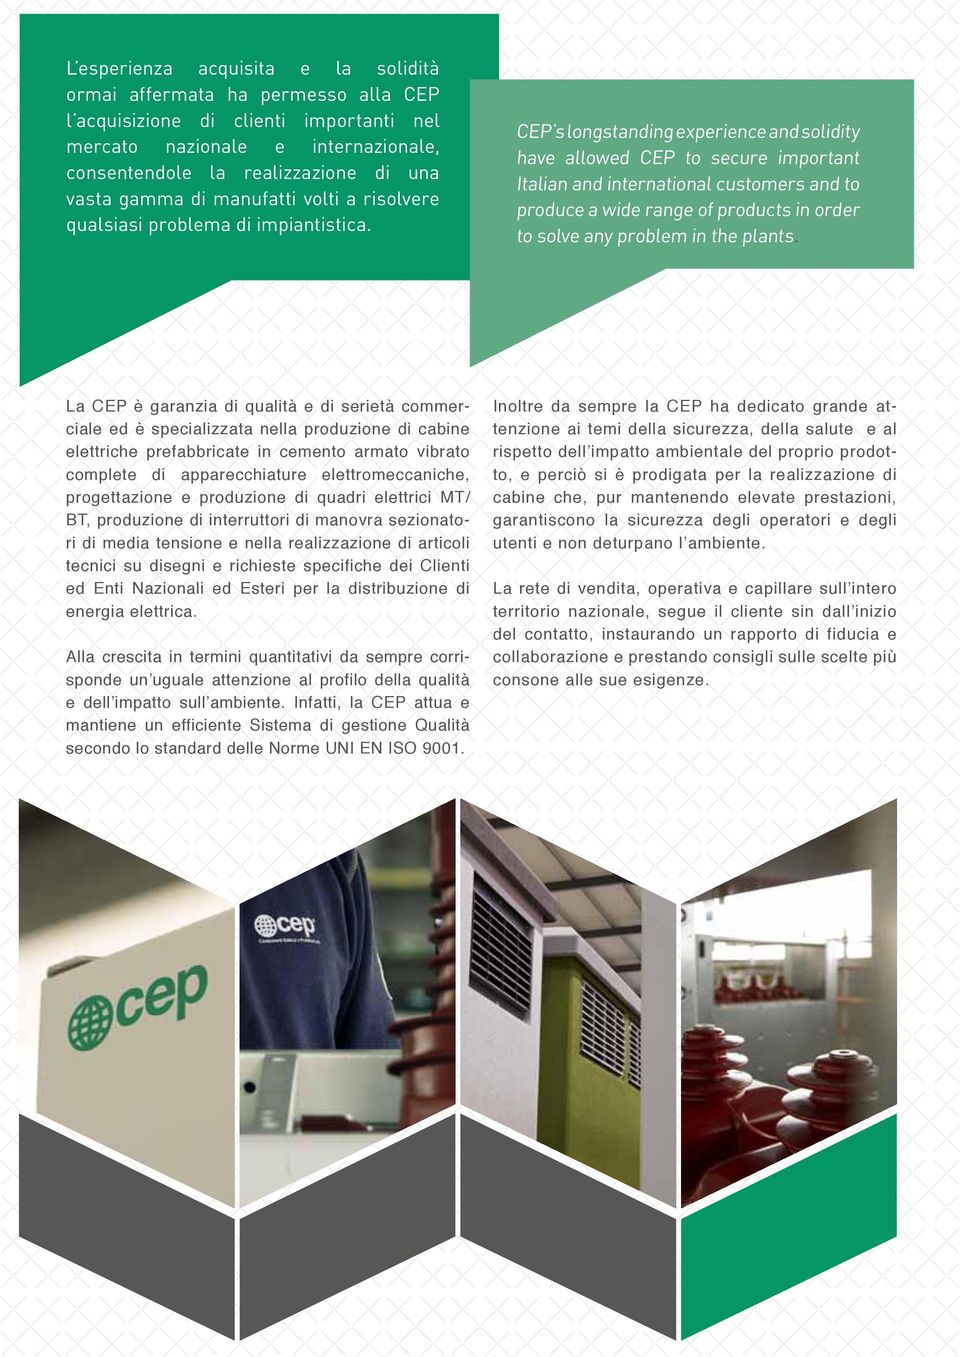 CEP s longstanding experience and solidity have allowed CEP to secure important Italian and international customers and to produce a wide range of products in order to solve any problem in the plants.